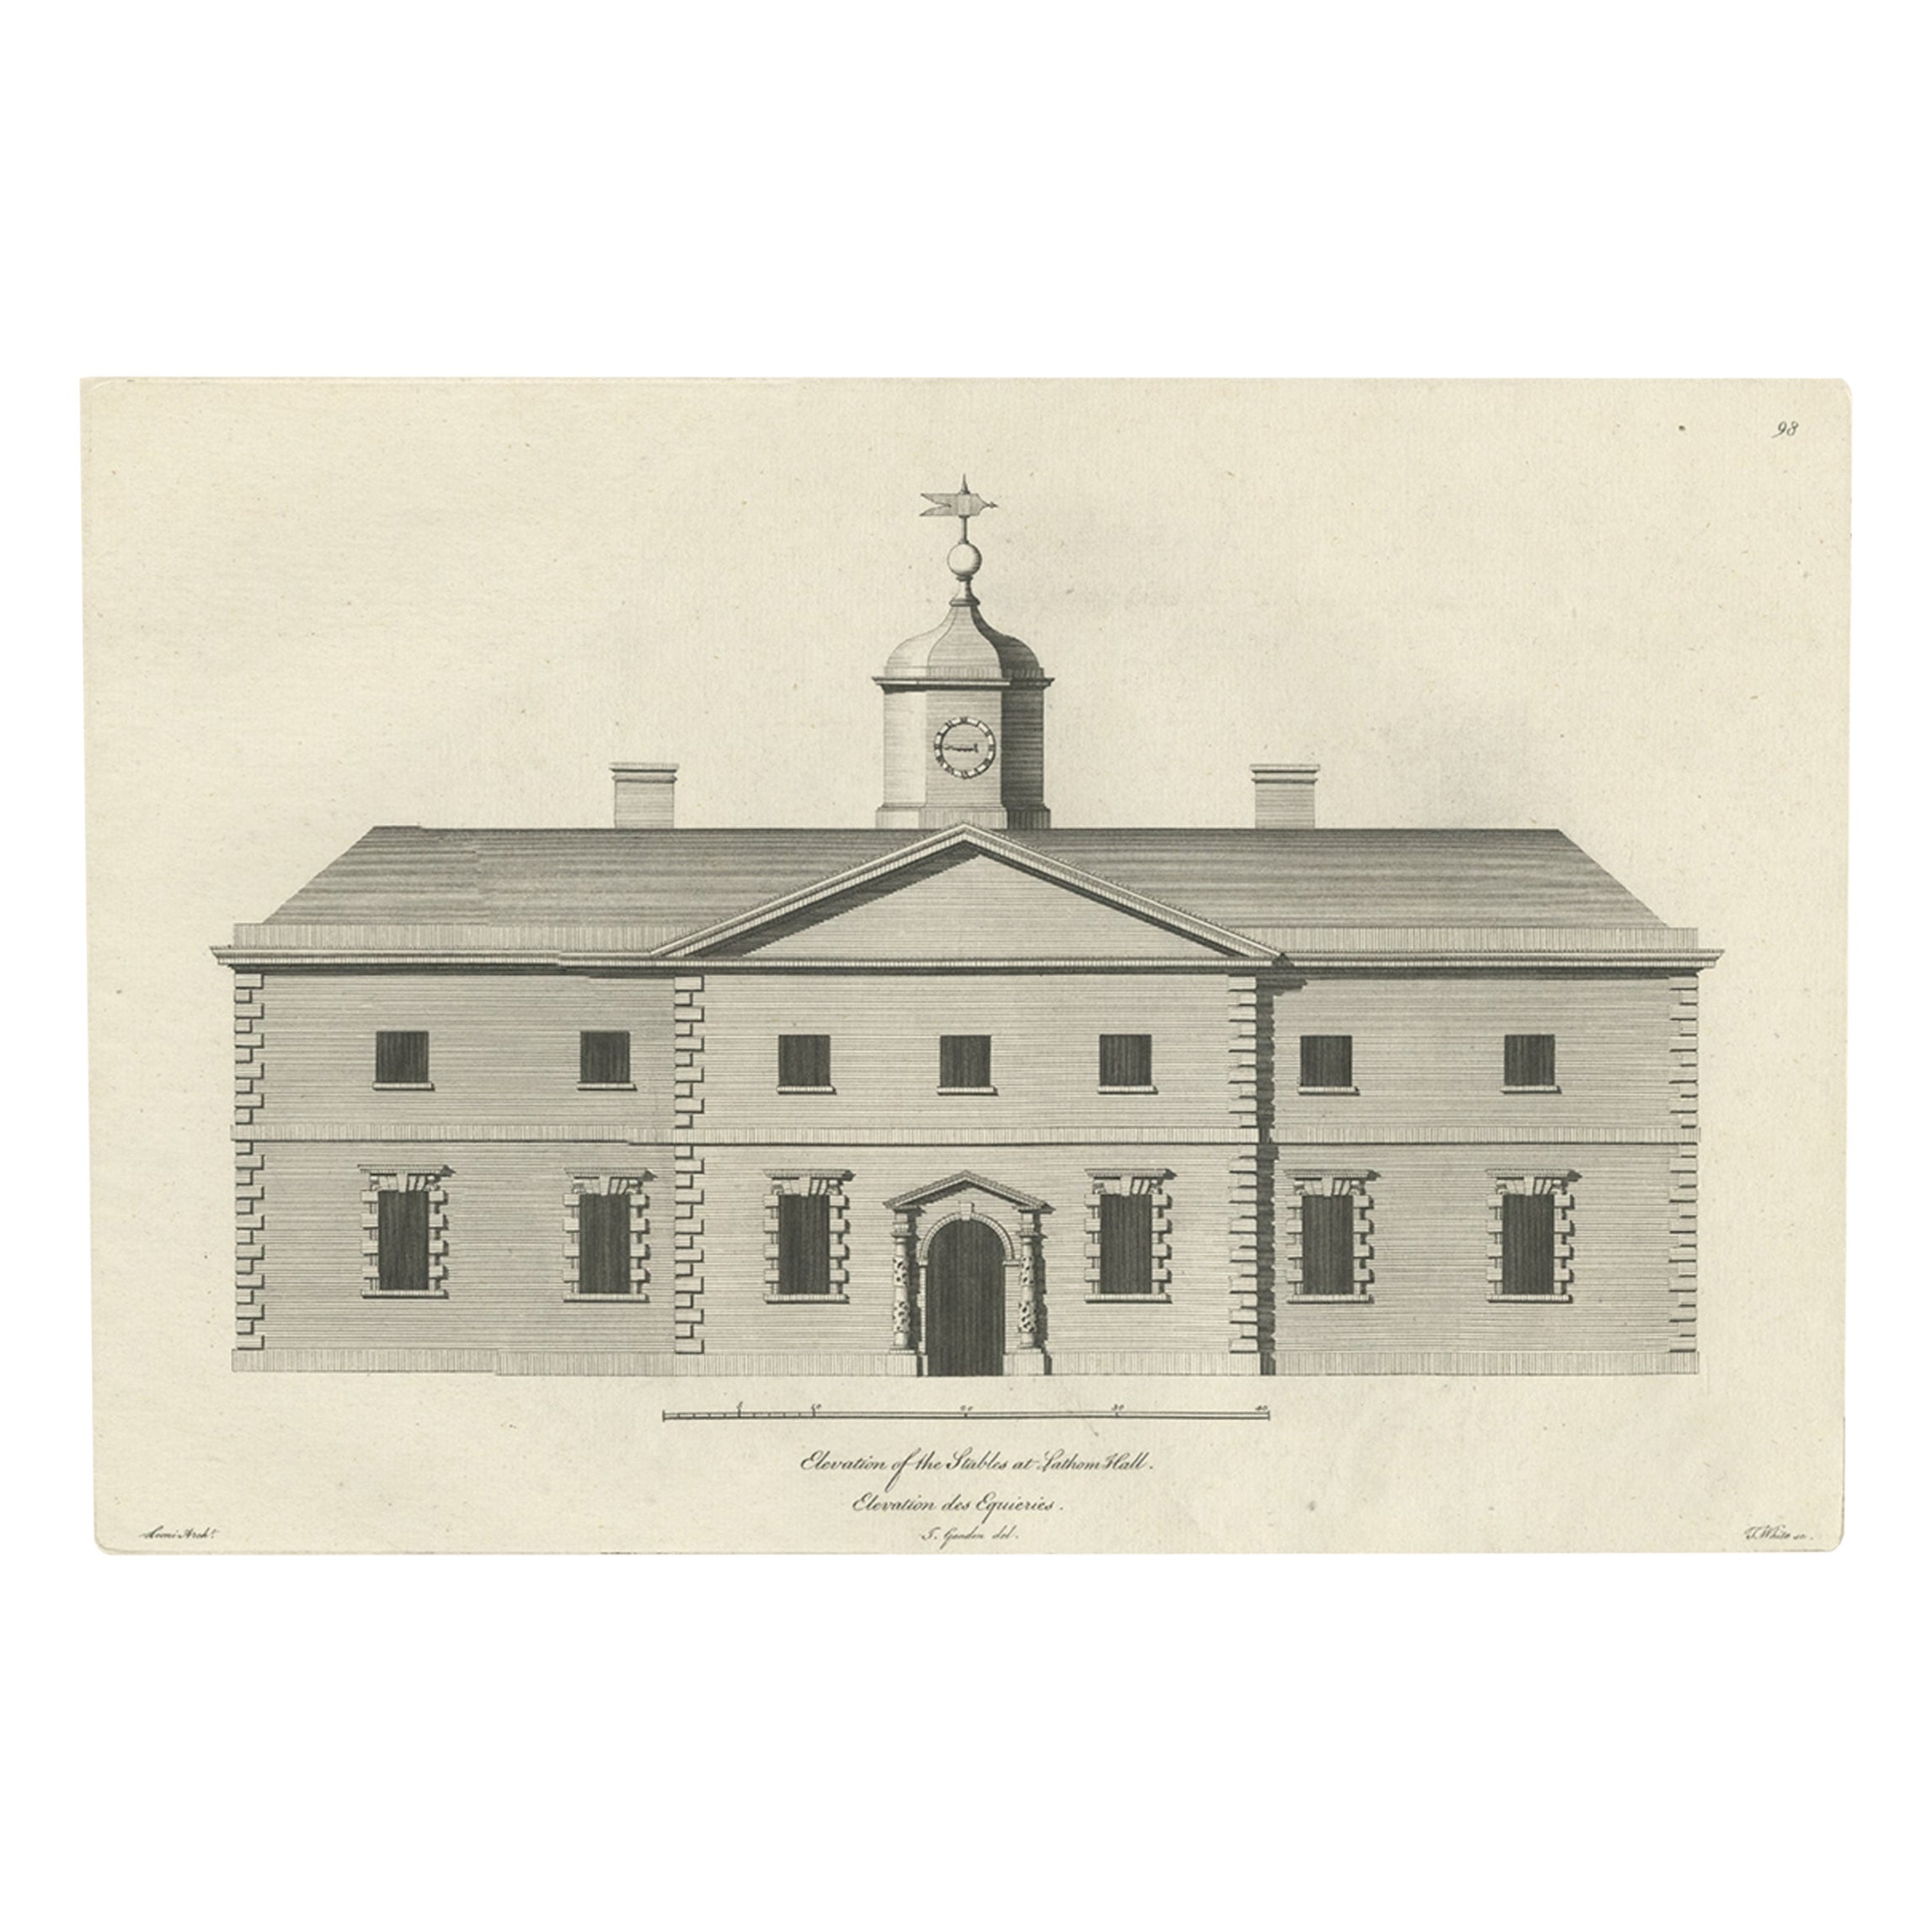 Antique Print of the Stables of Lathom House in Lancashire, England, c.1770